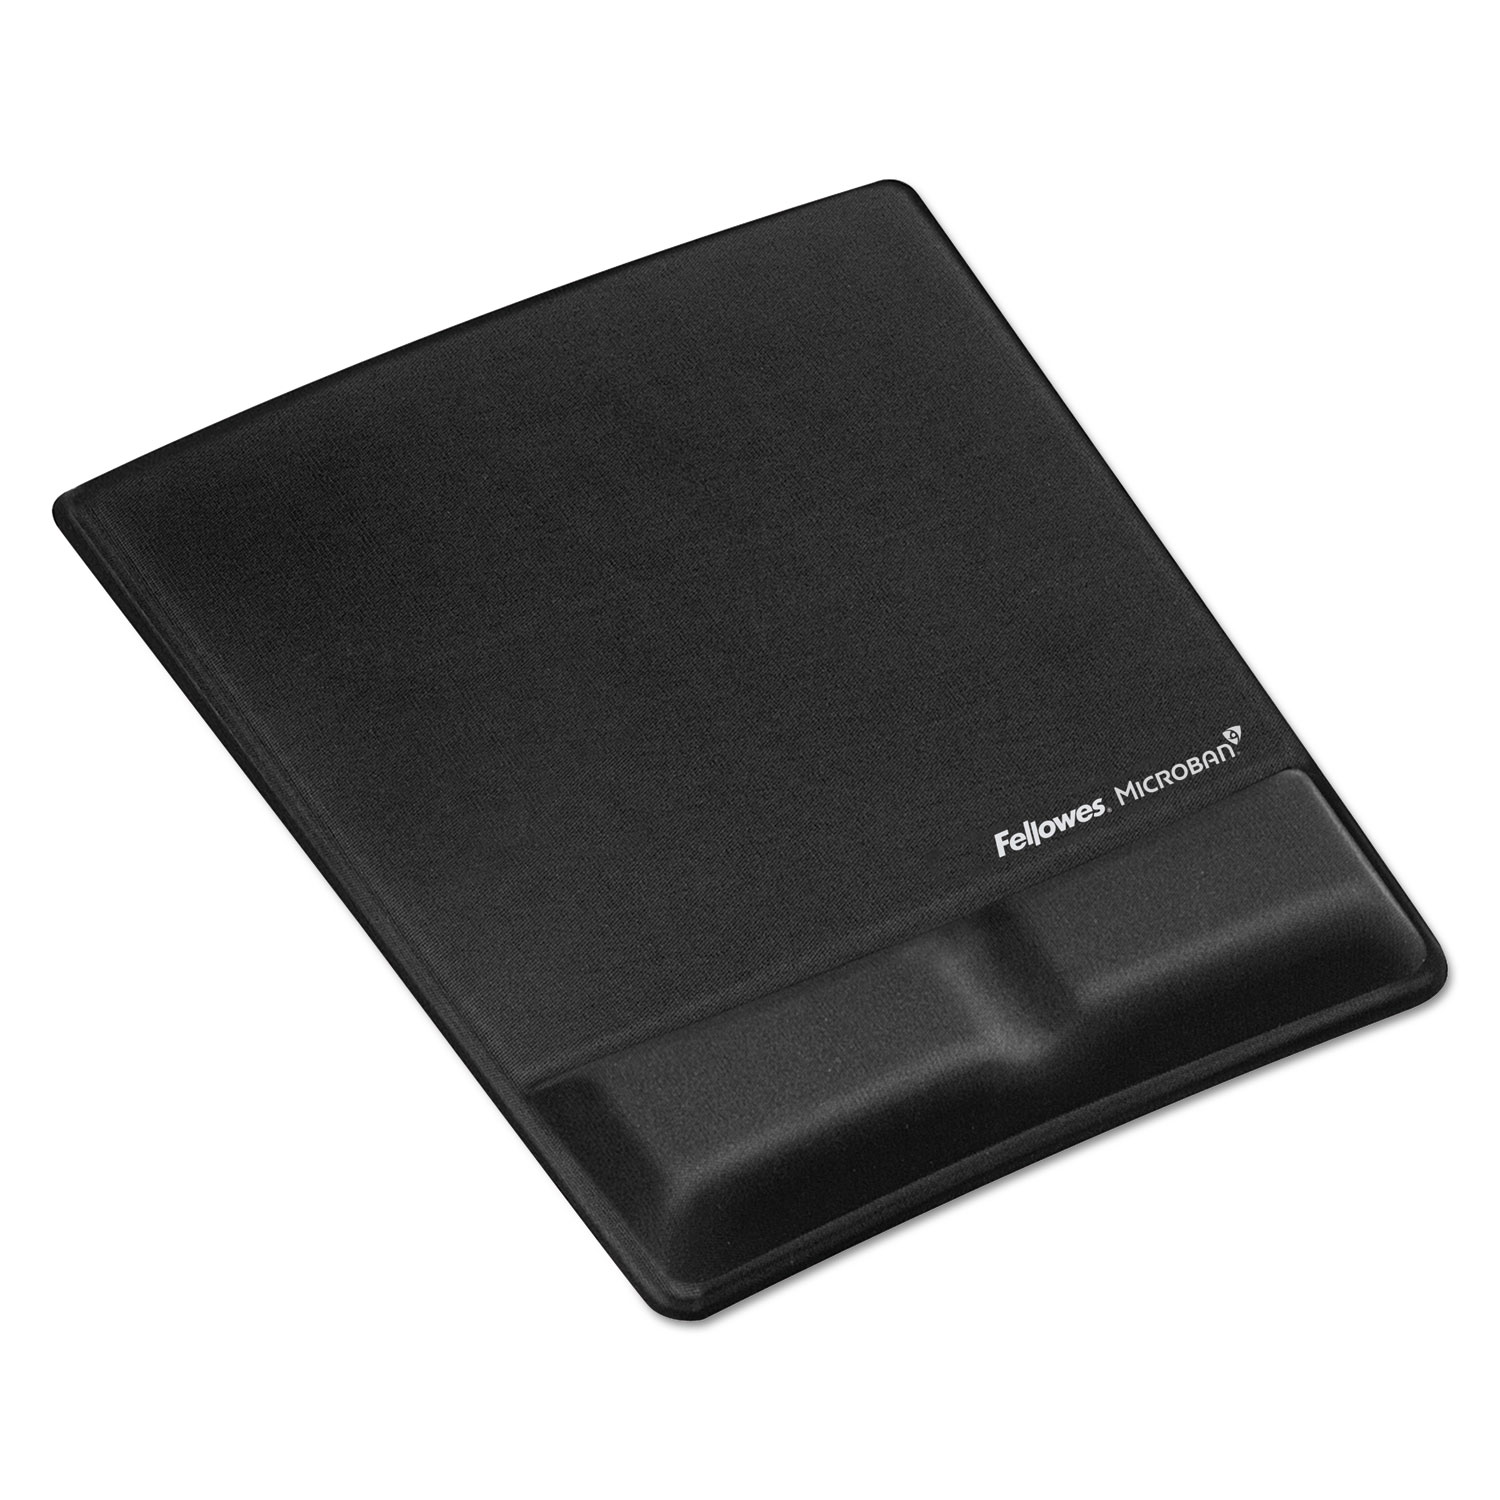 Ergonomic Memory Foam Wrist Support w/Attached Mouse Pad, Black | Bundle of 5 Each - image 1 of 6